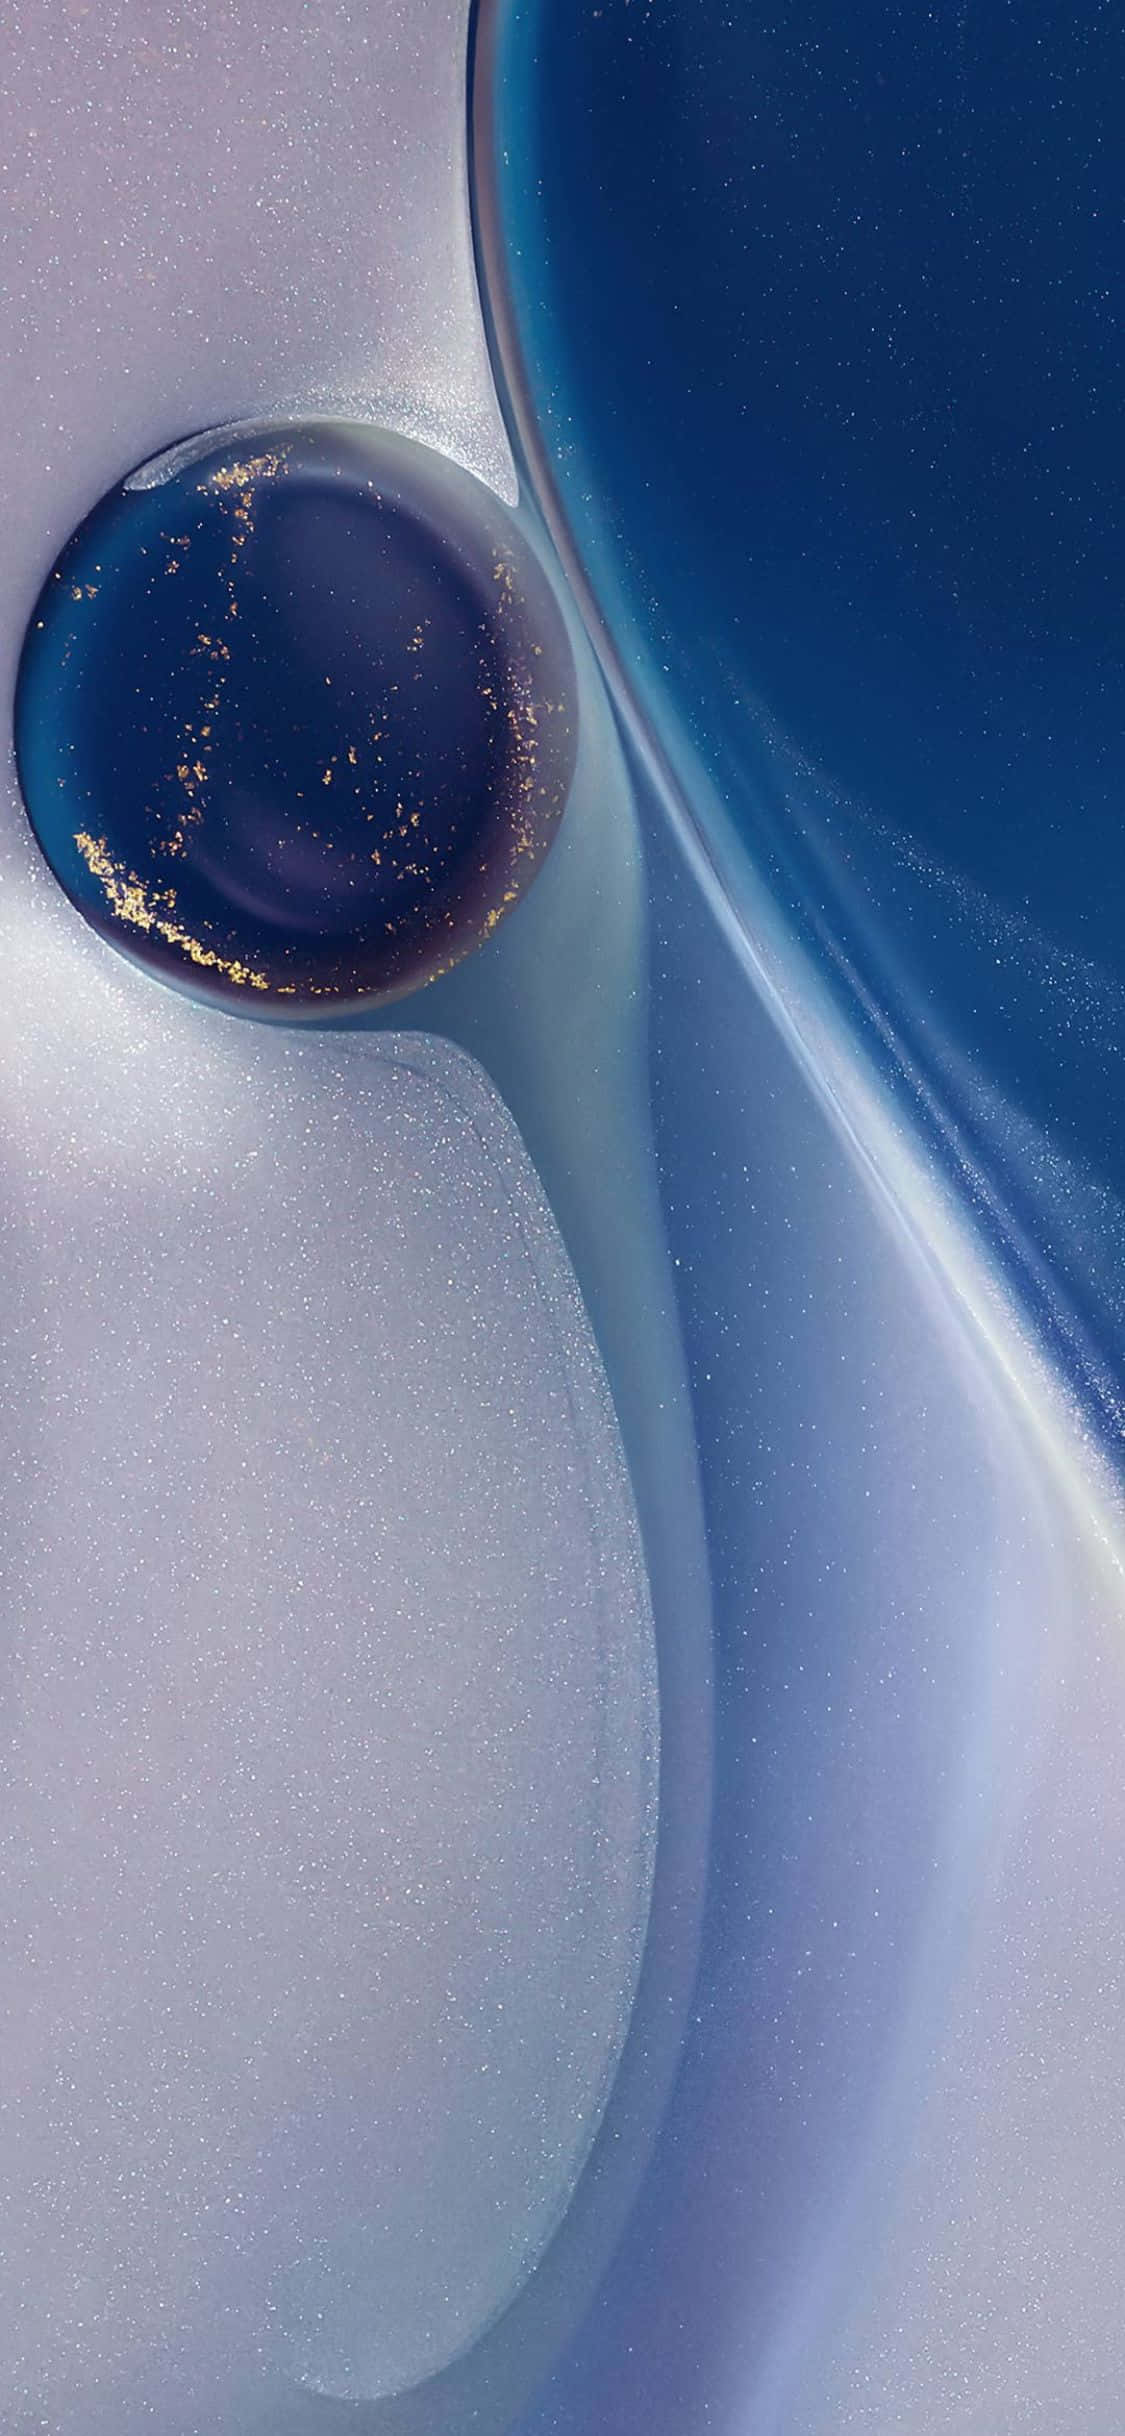 Modern design meets power and performance with the new iPhone 11 Pro" Wallpaper